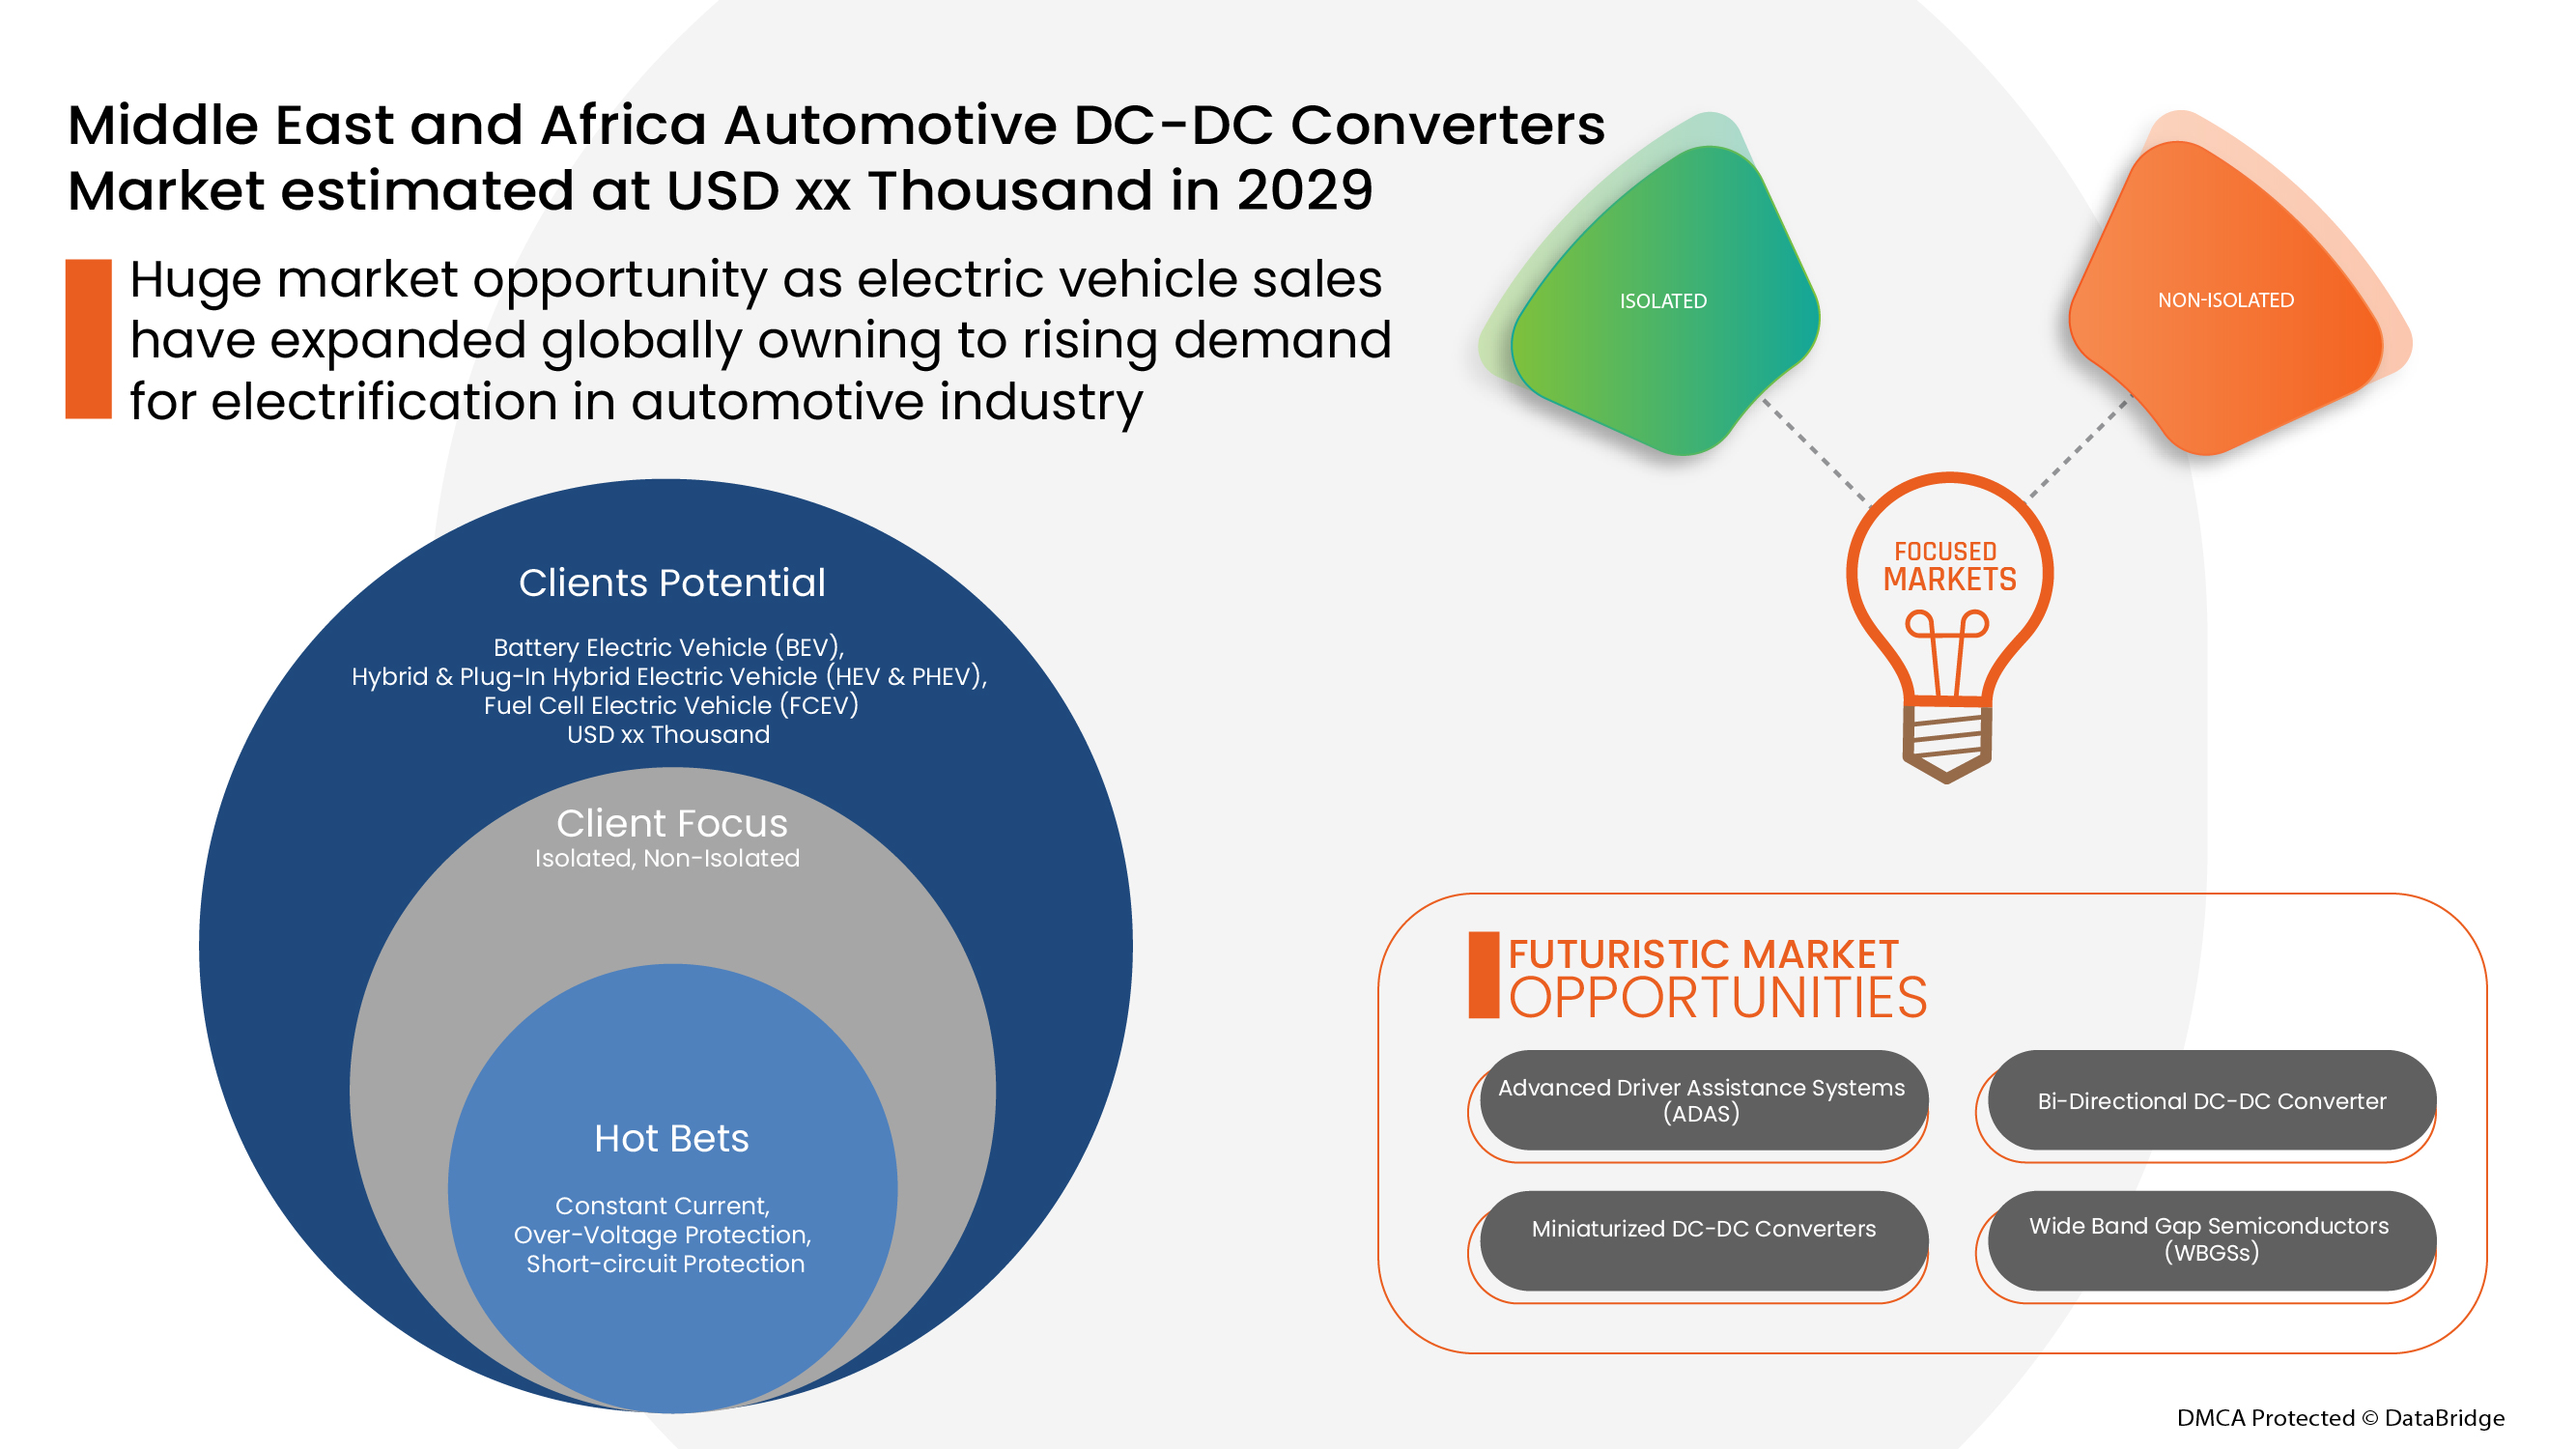 Middle East and Africa Automotive DC-DC Converters Market